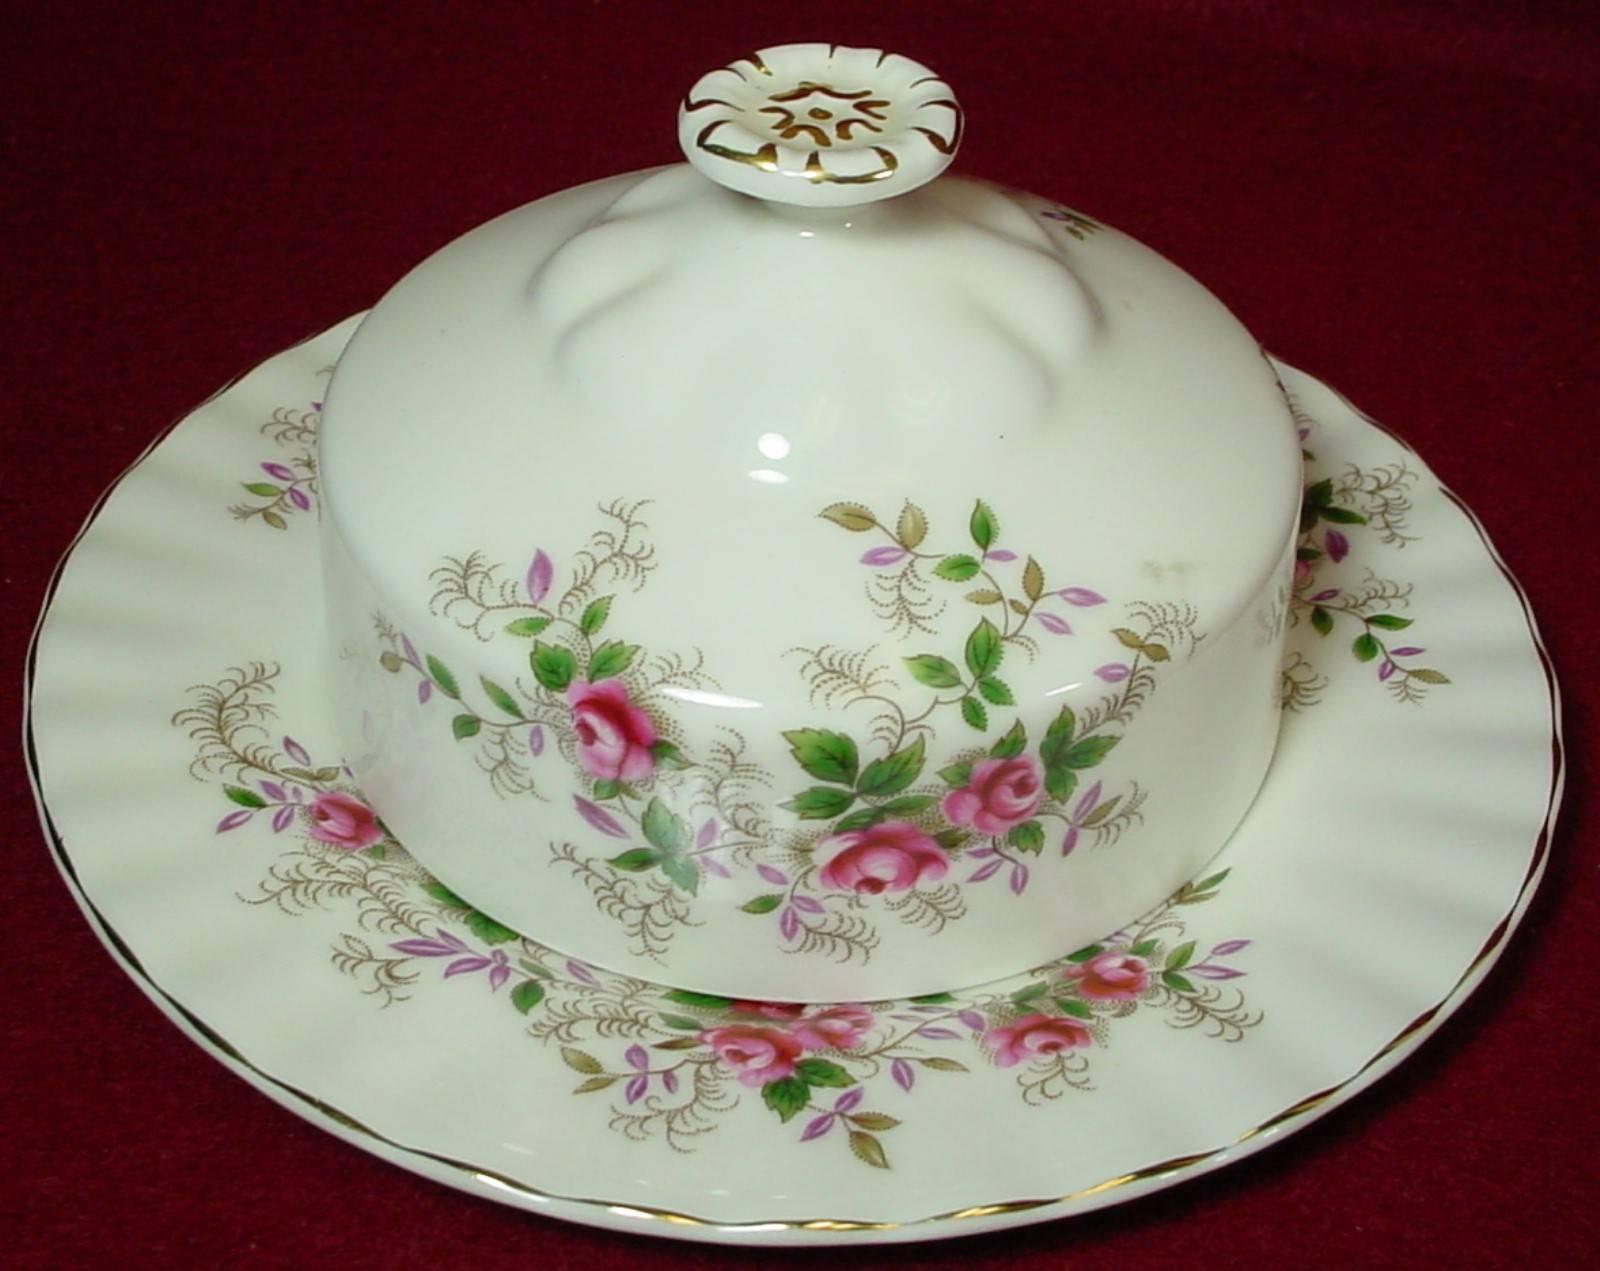 20th Century Royal Albert China Lavender Rose Pattern 59-Pc Set Service for Eight Plus Extras